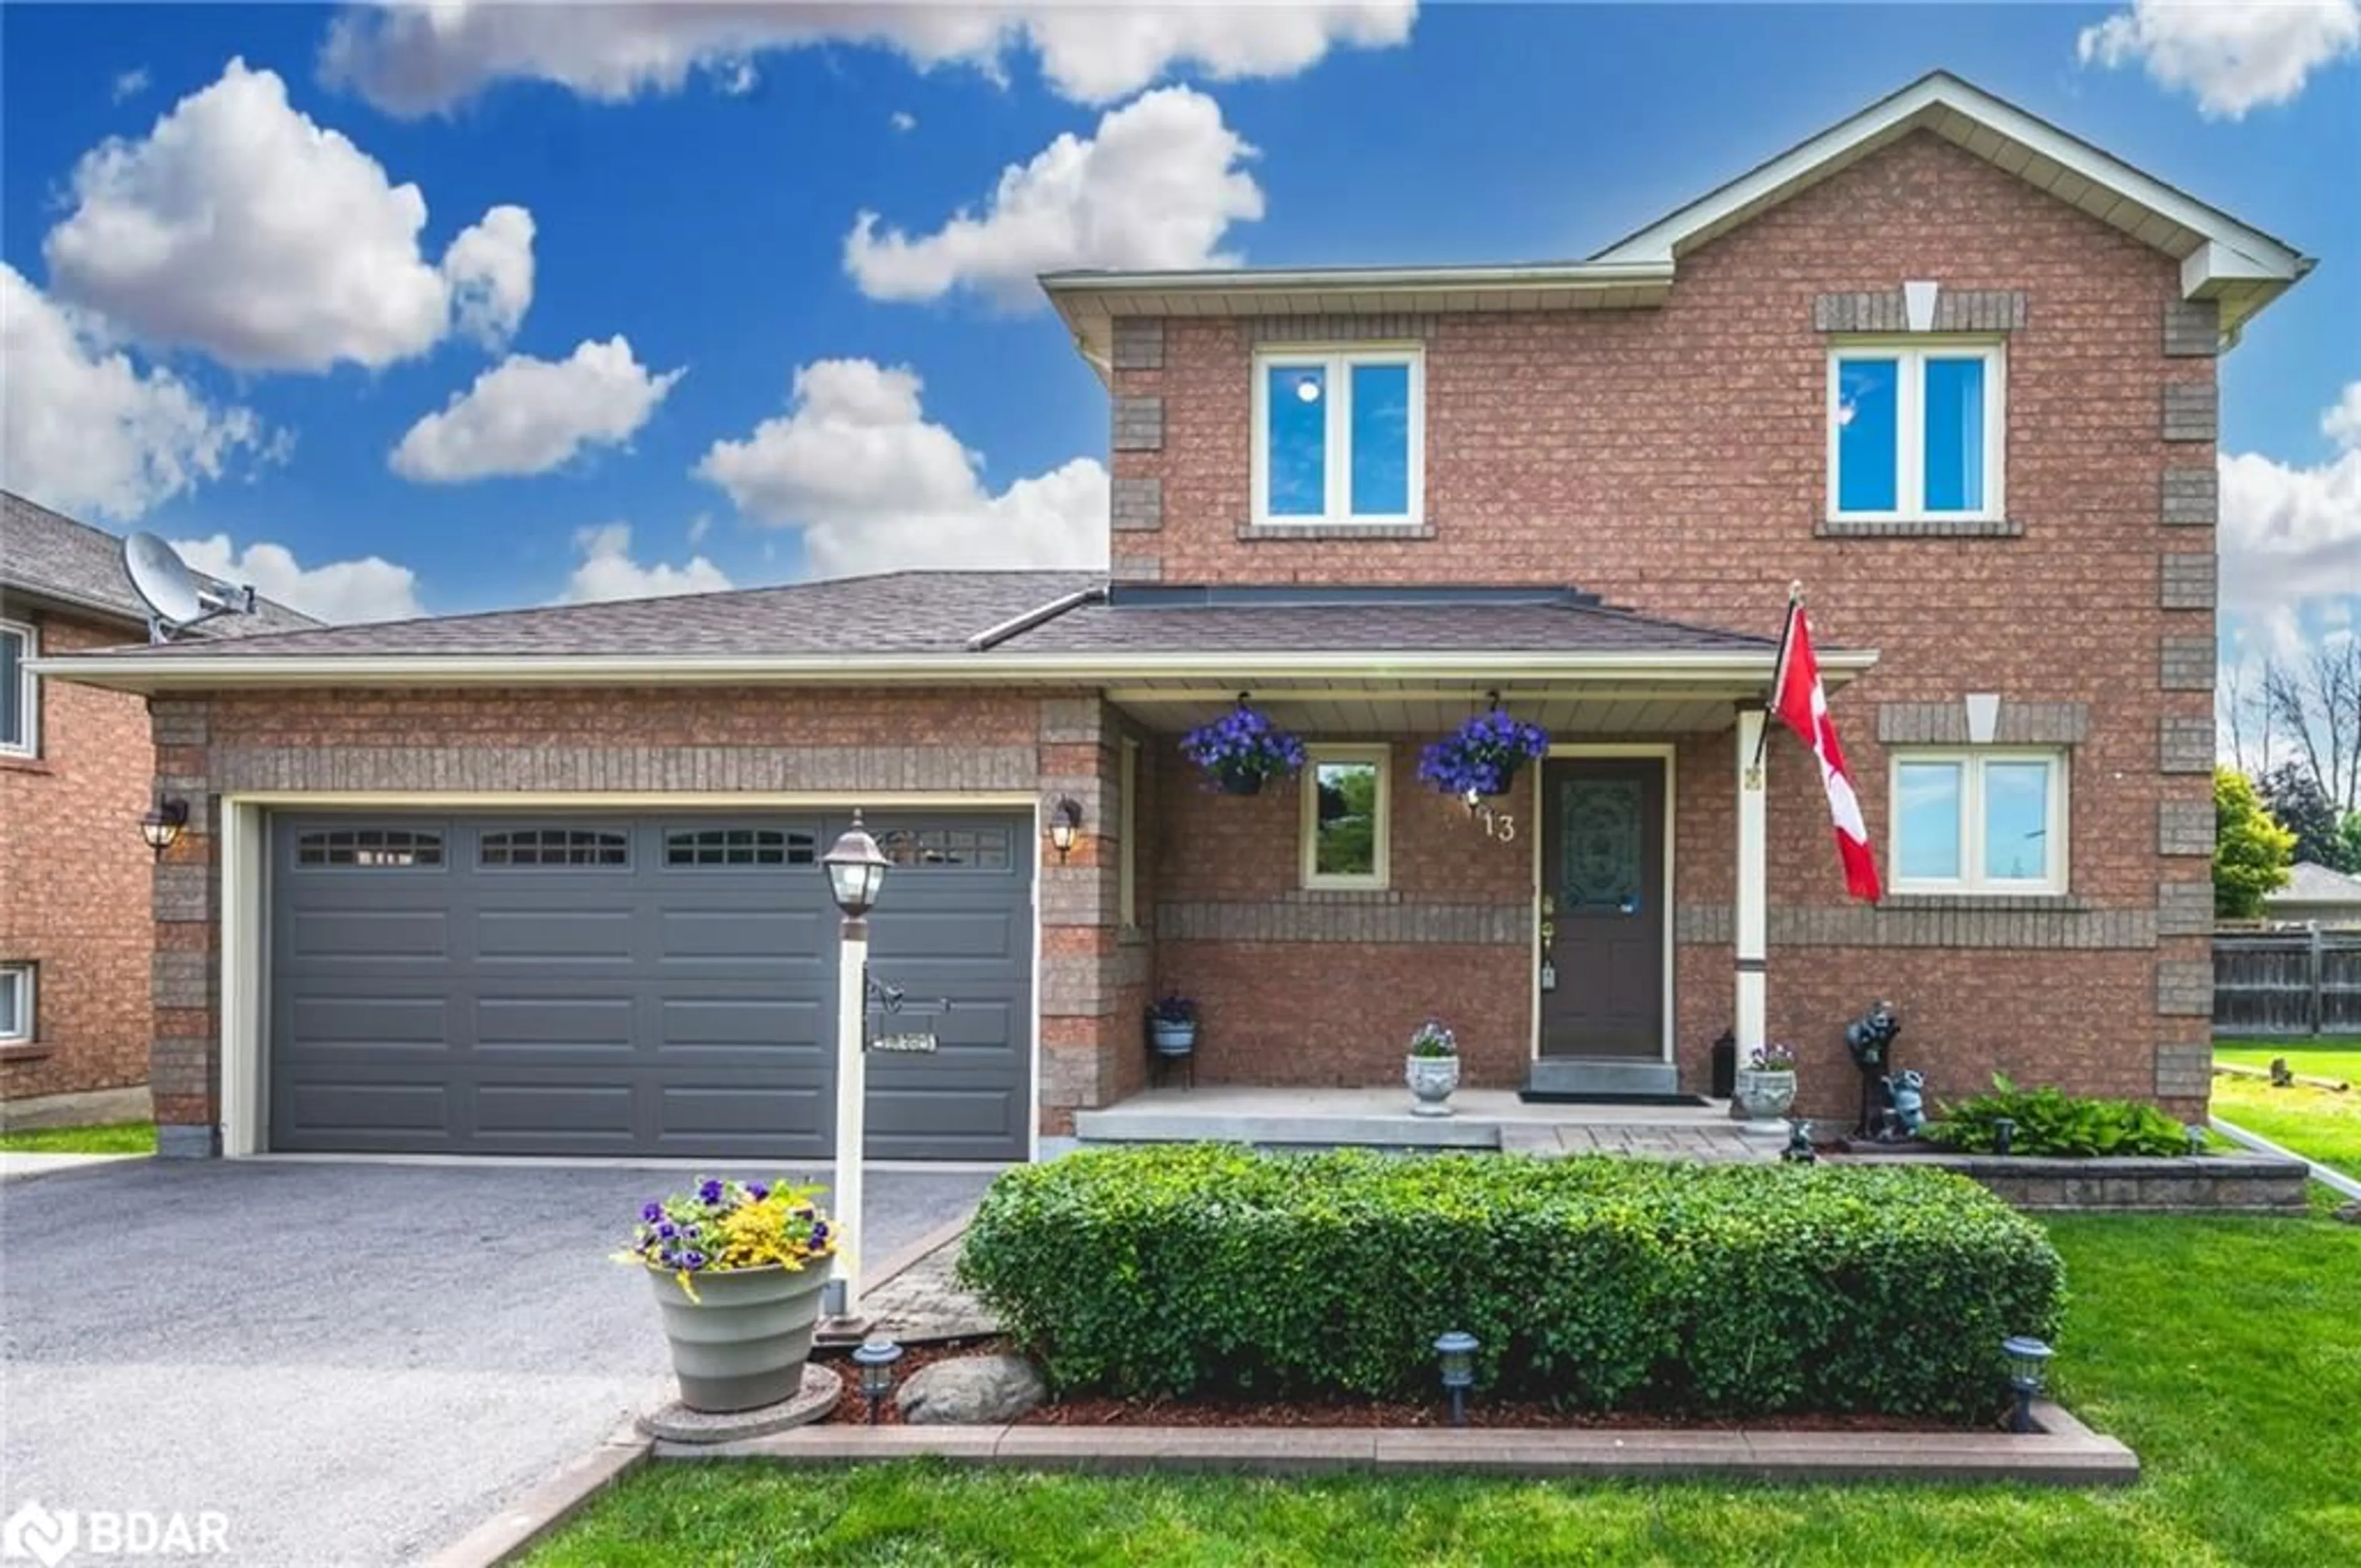 Home with brick exterior material for 13 Daniele Ave, New Tecumseth Ontario L0G 1A0